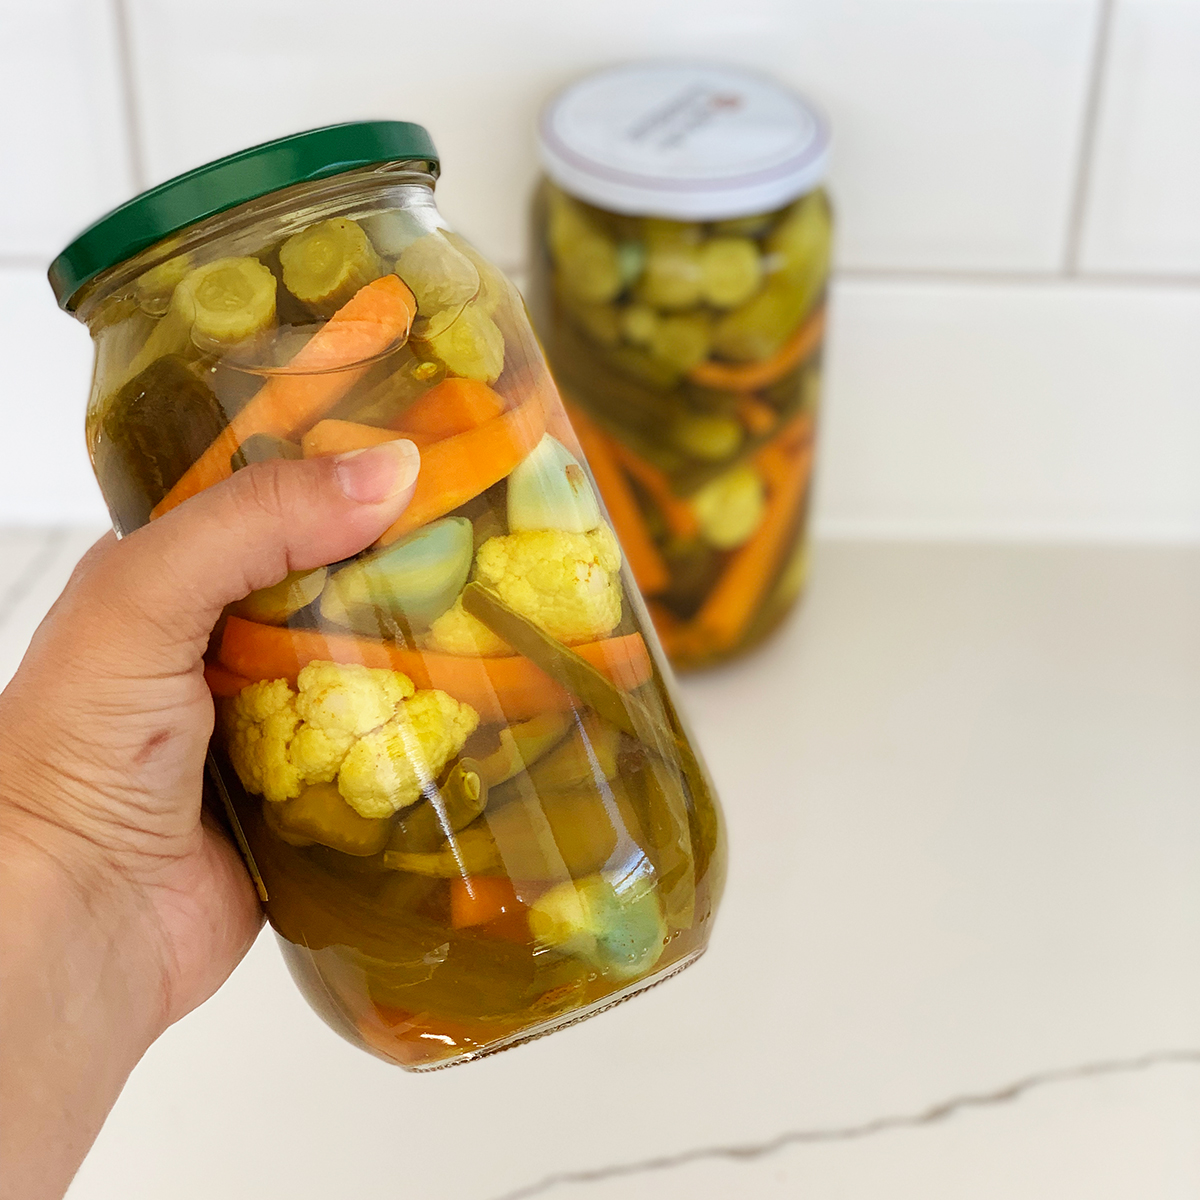 Home made pickled vegetables in two jars, one held in a hand